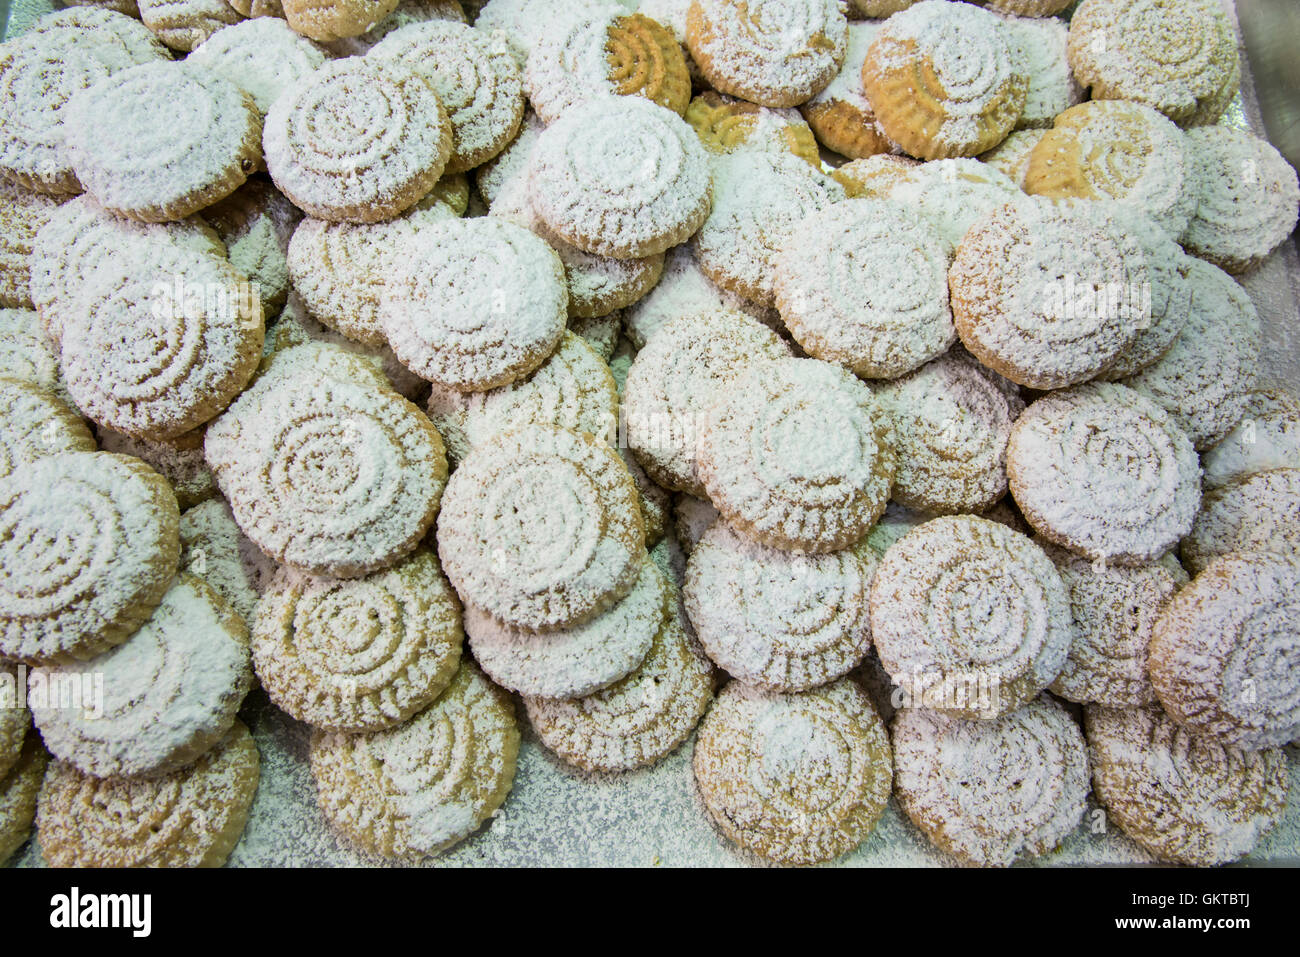 Biscuit à Mamoul at market stall Banque D'Images